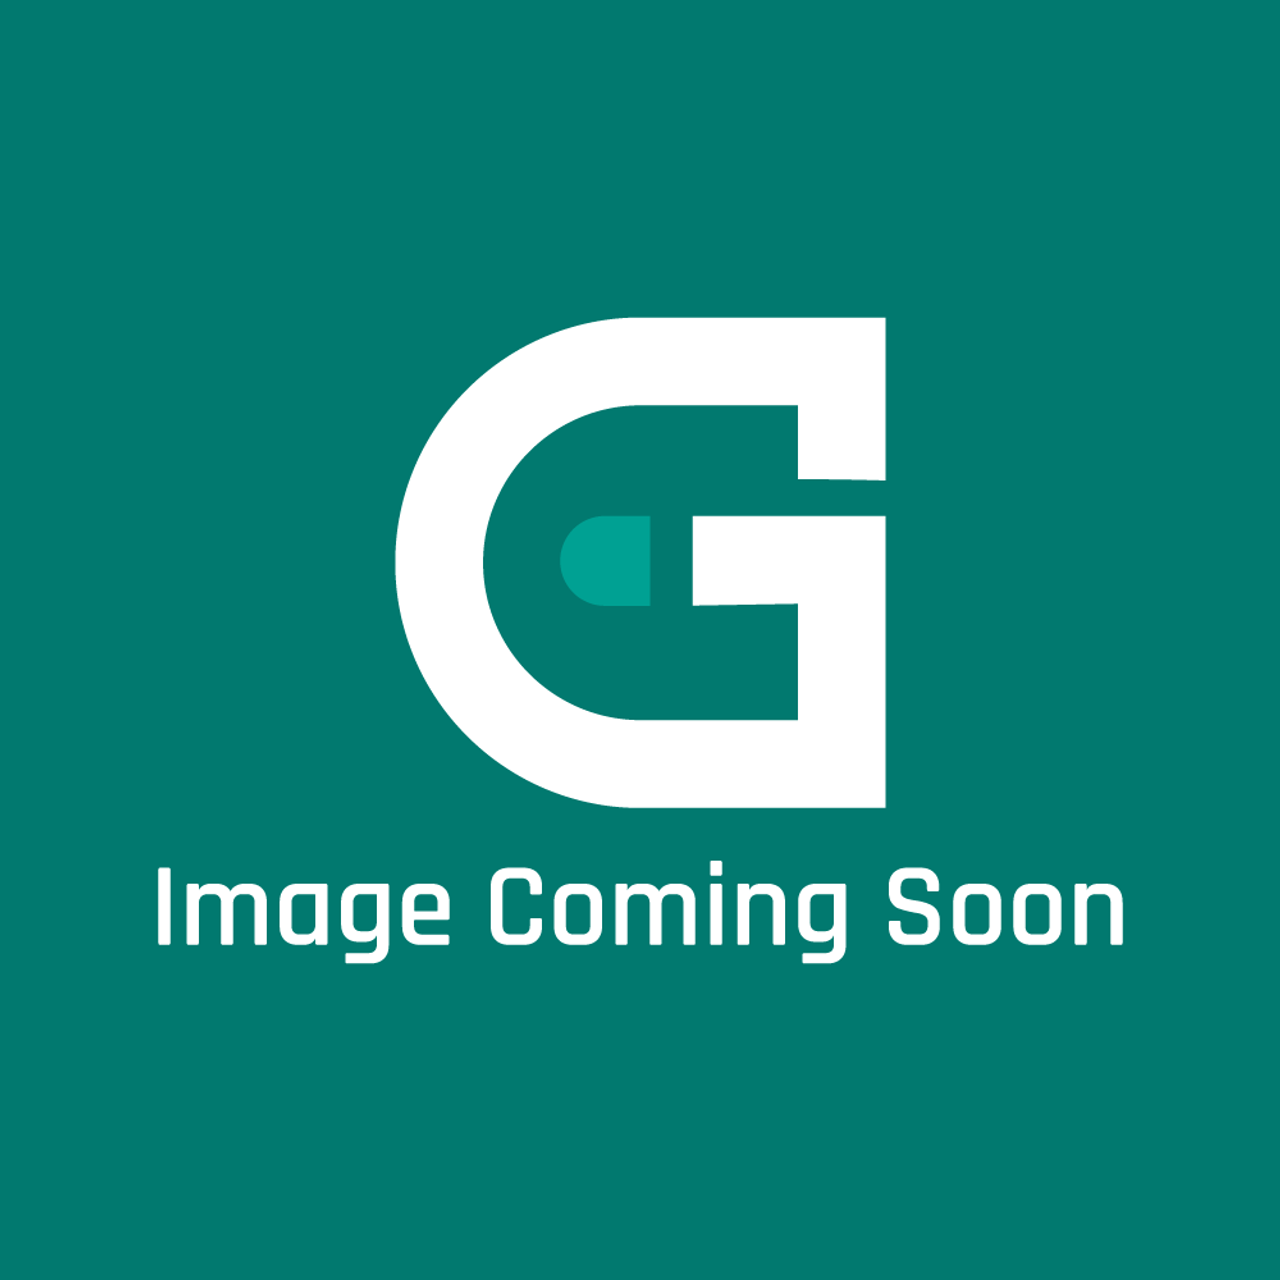 GE Appliances WR50X10064 - Icemaker Tube Heater - Image Coming Soon!